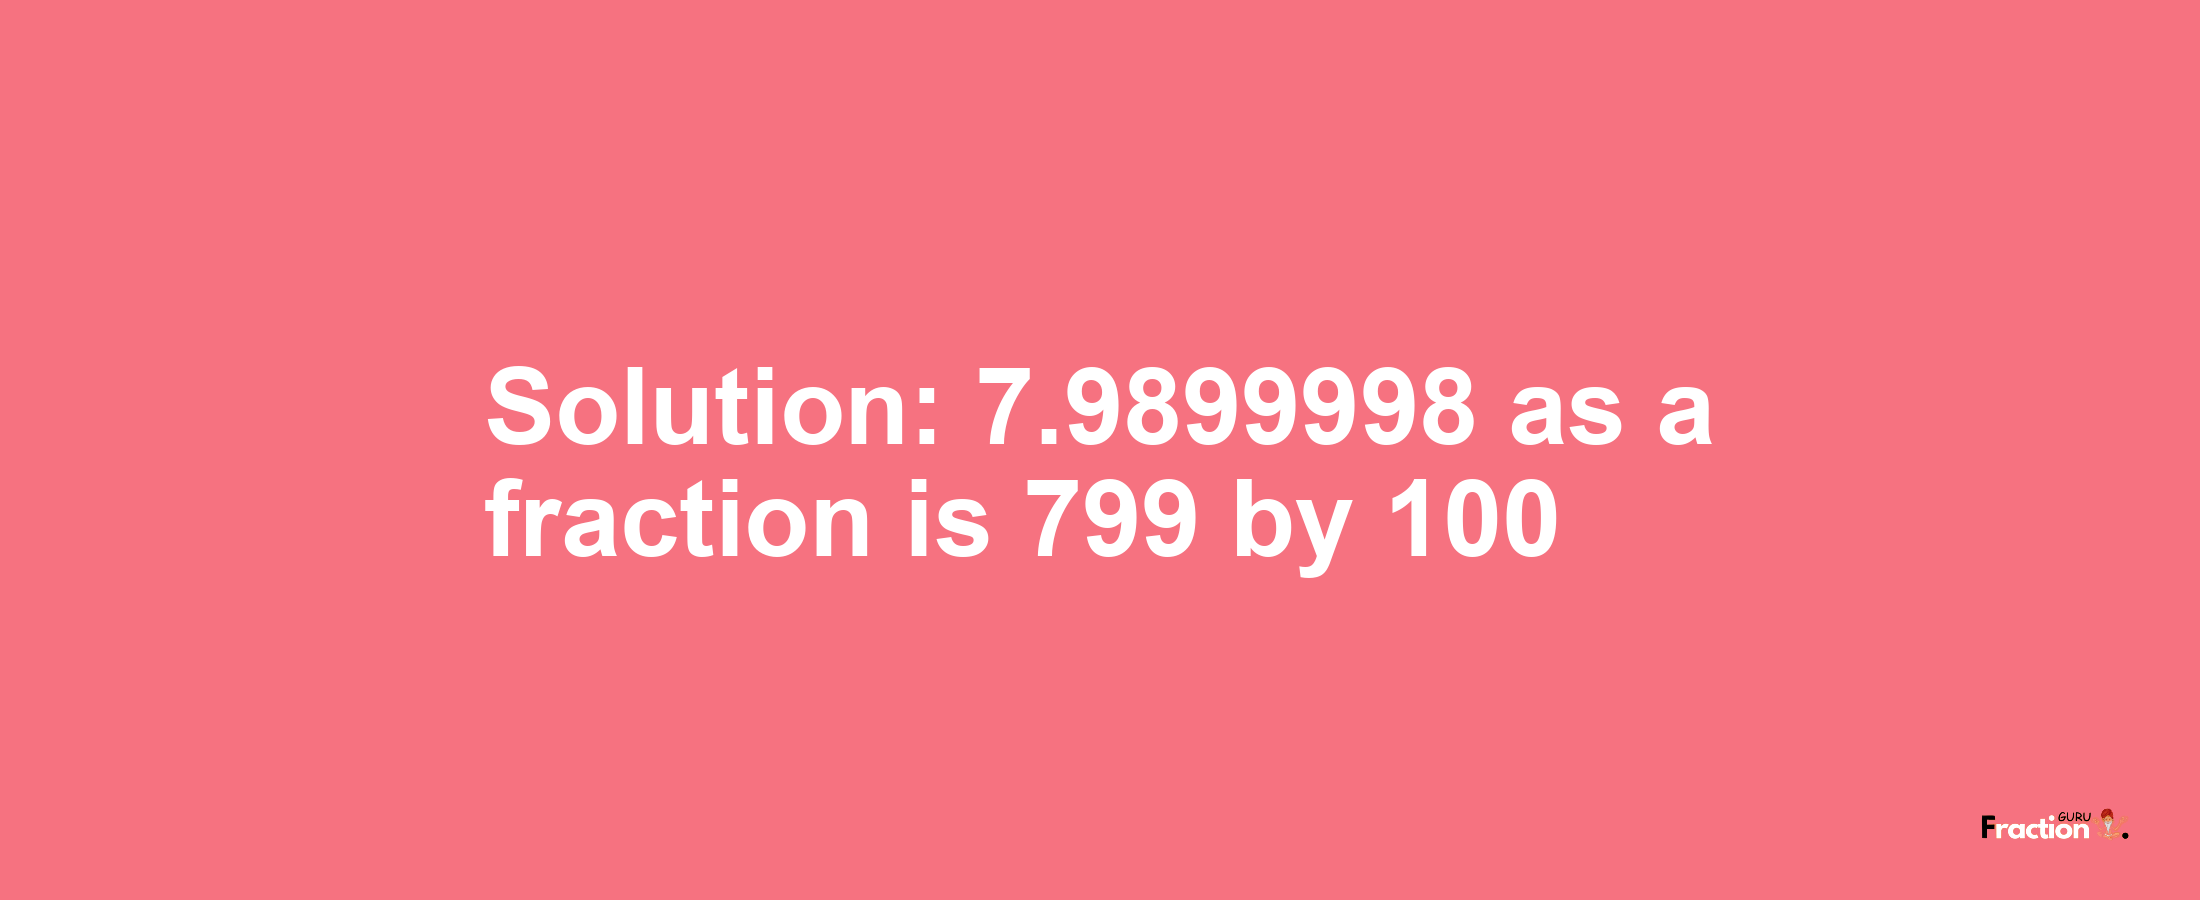 Solution:7.9899998 as a fraction is 799/100